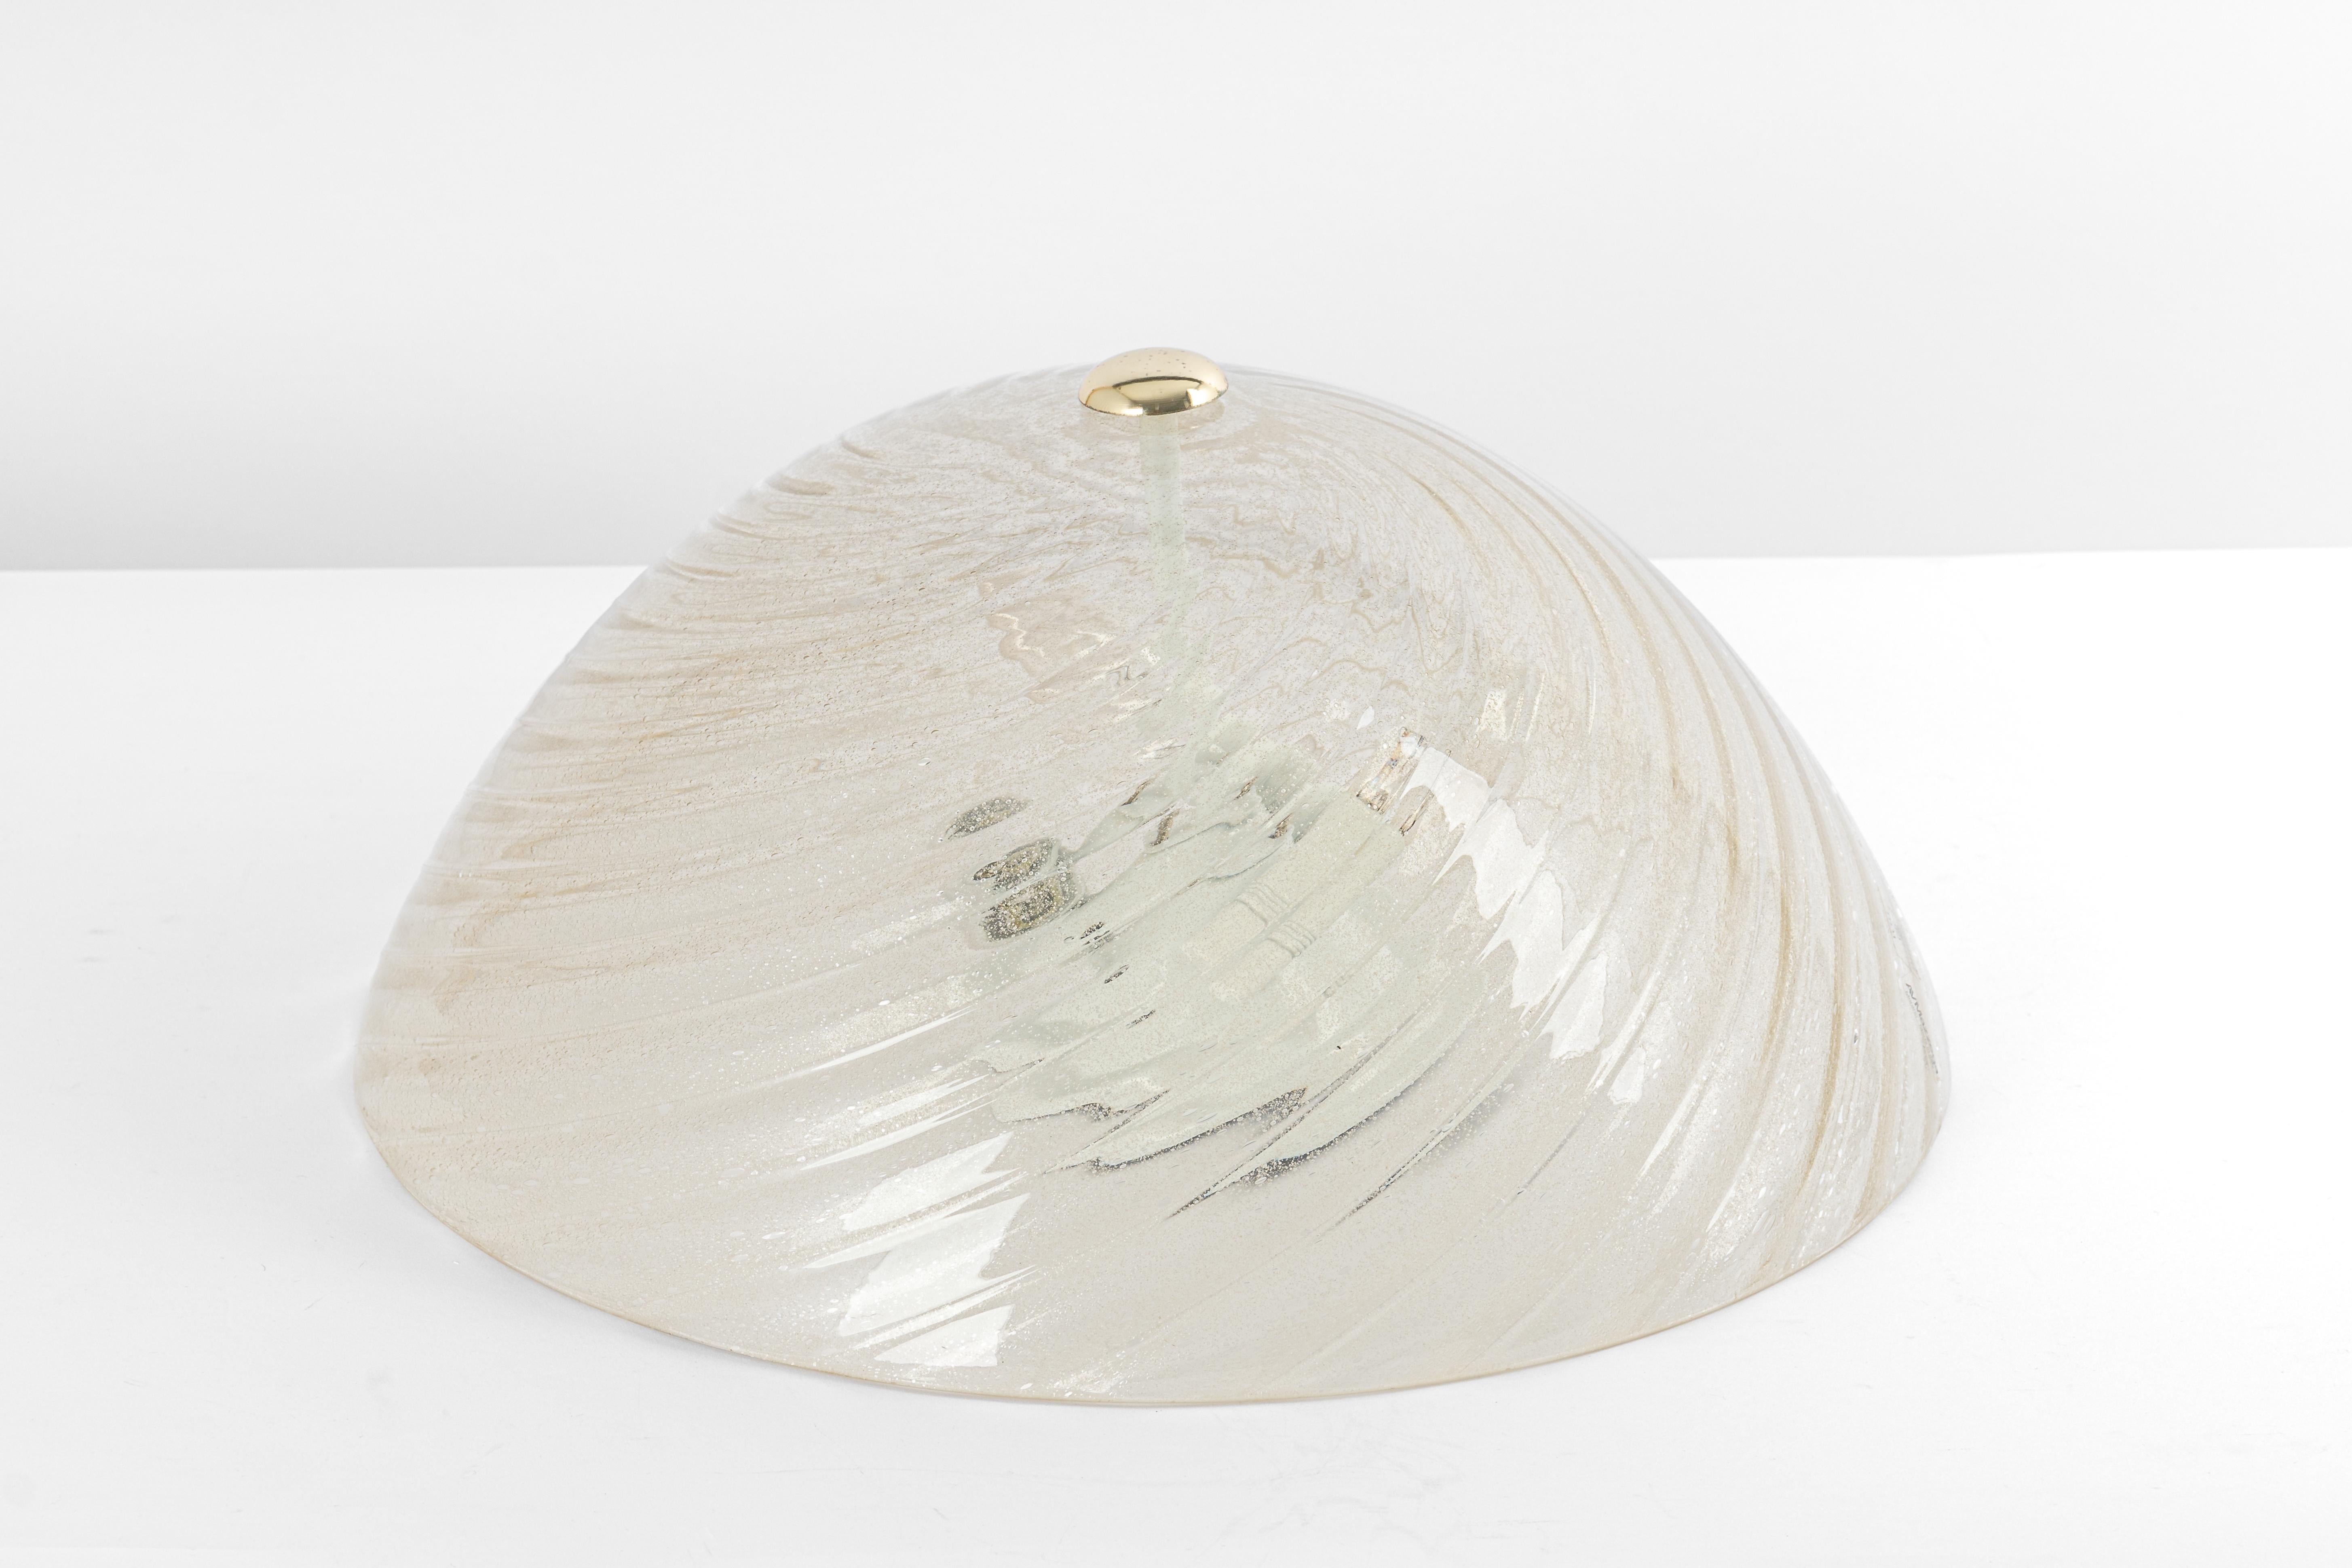 Mid-century Murano glass Flush mount light by Barovier & Toso, Italy, 1970s
Very good condition.

High quality and in very good condition. Cleaned, well-wired, and ready to use.

The fixture requires 3 x E14 standard bulbs with 40W max